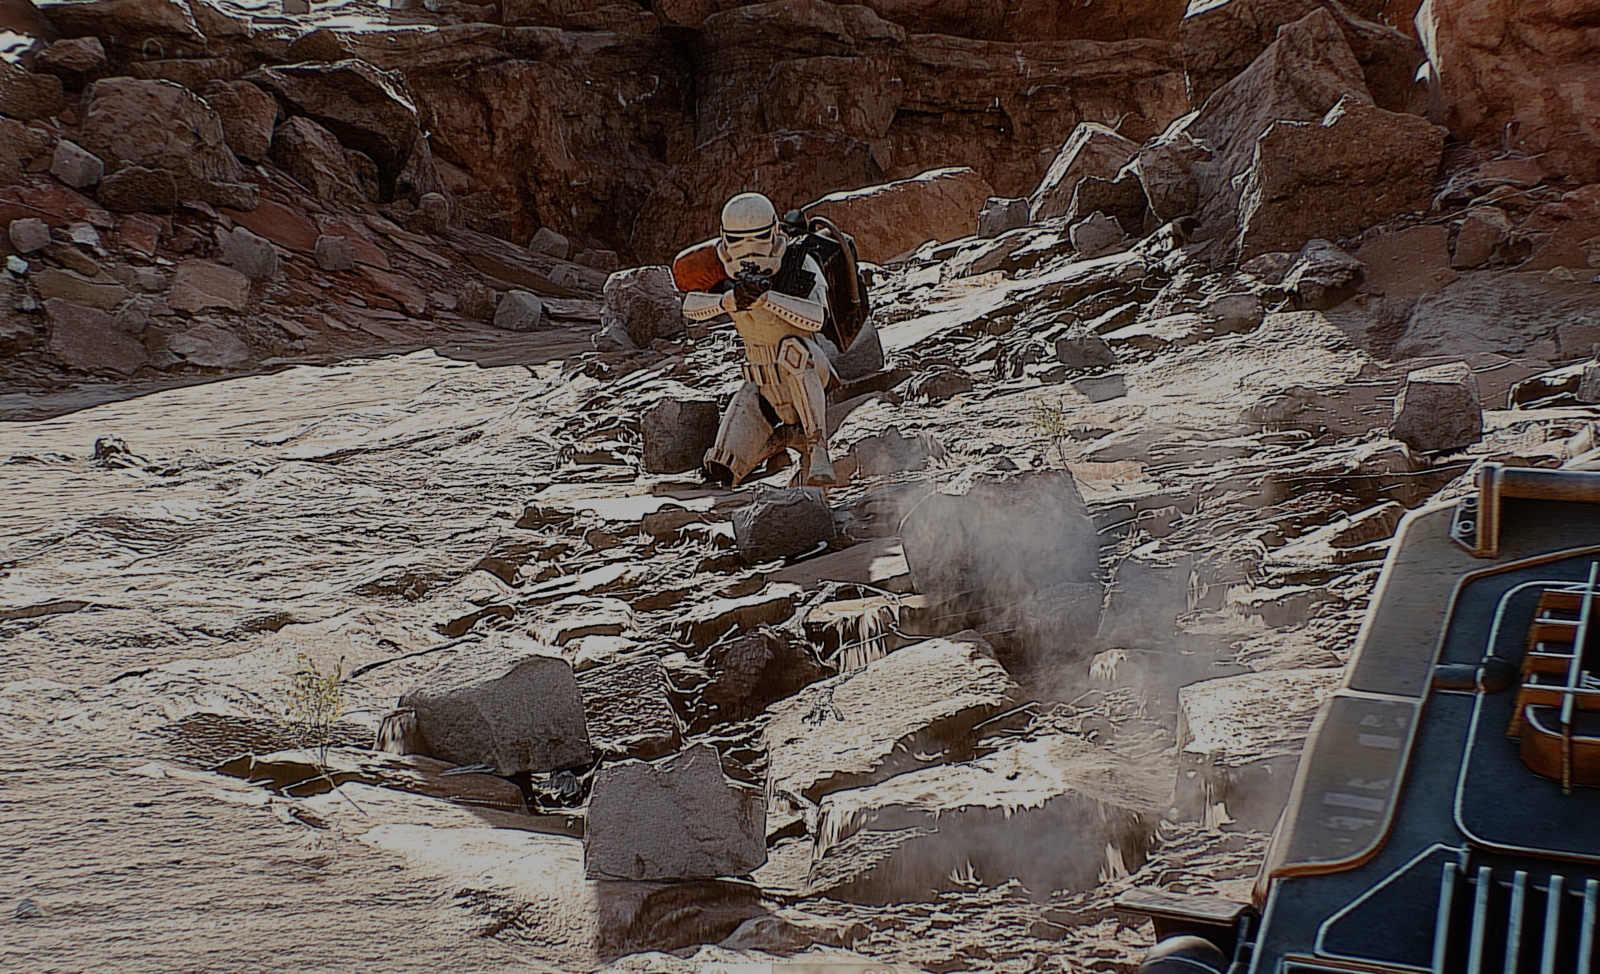 check out these incredible star wars battlefront screens are they real or fake  image 1